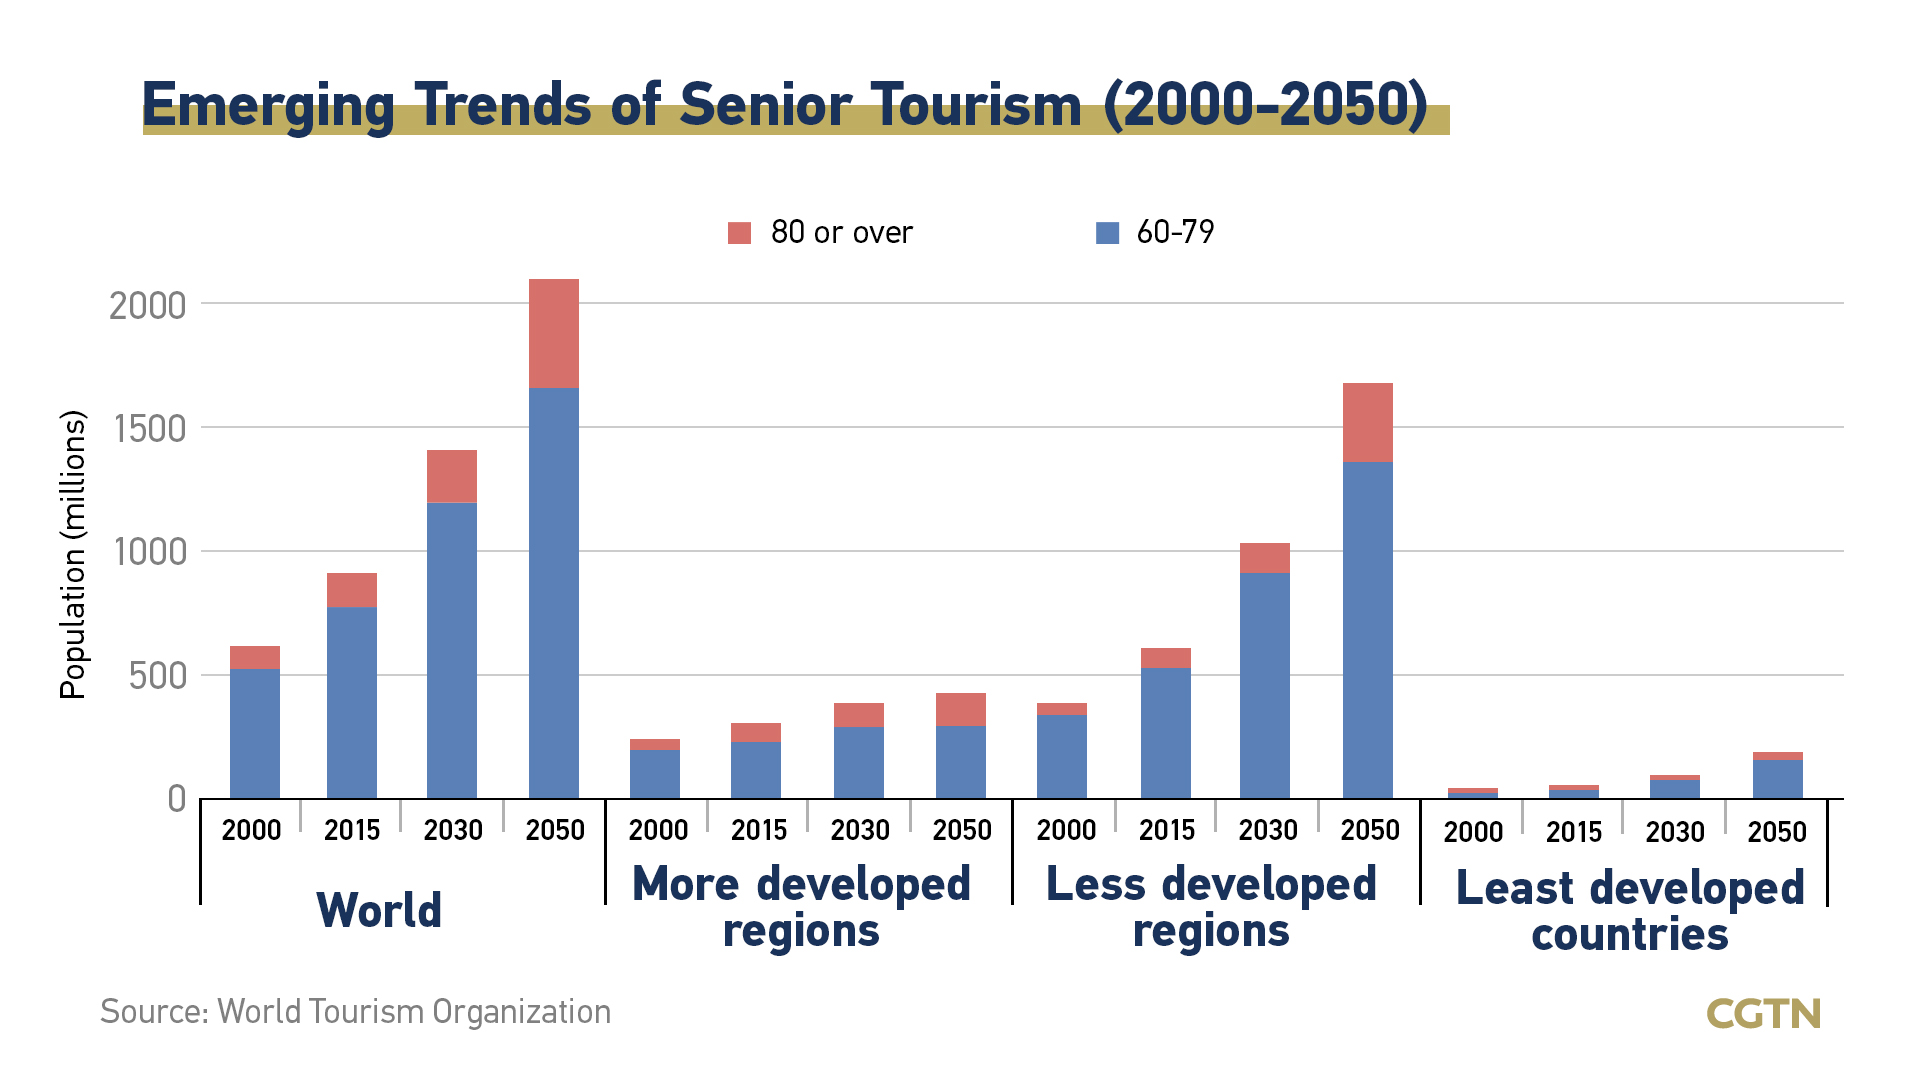 Aging well: China has all it takes to become a top destination for senior tourism